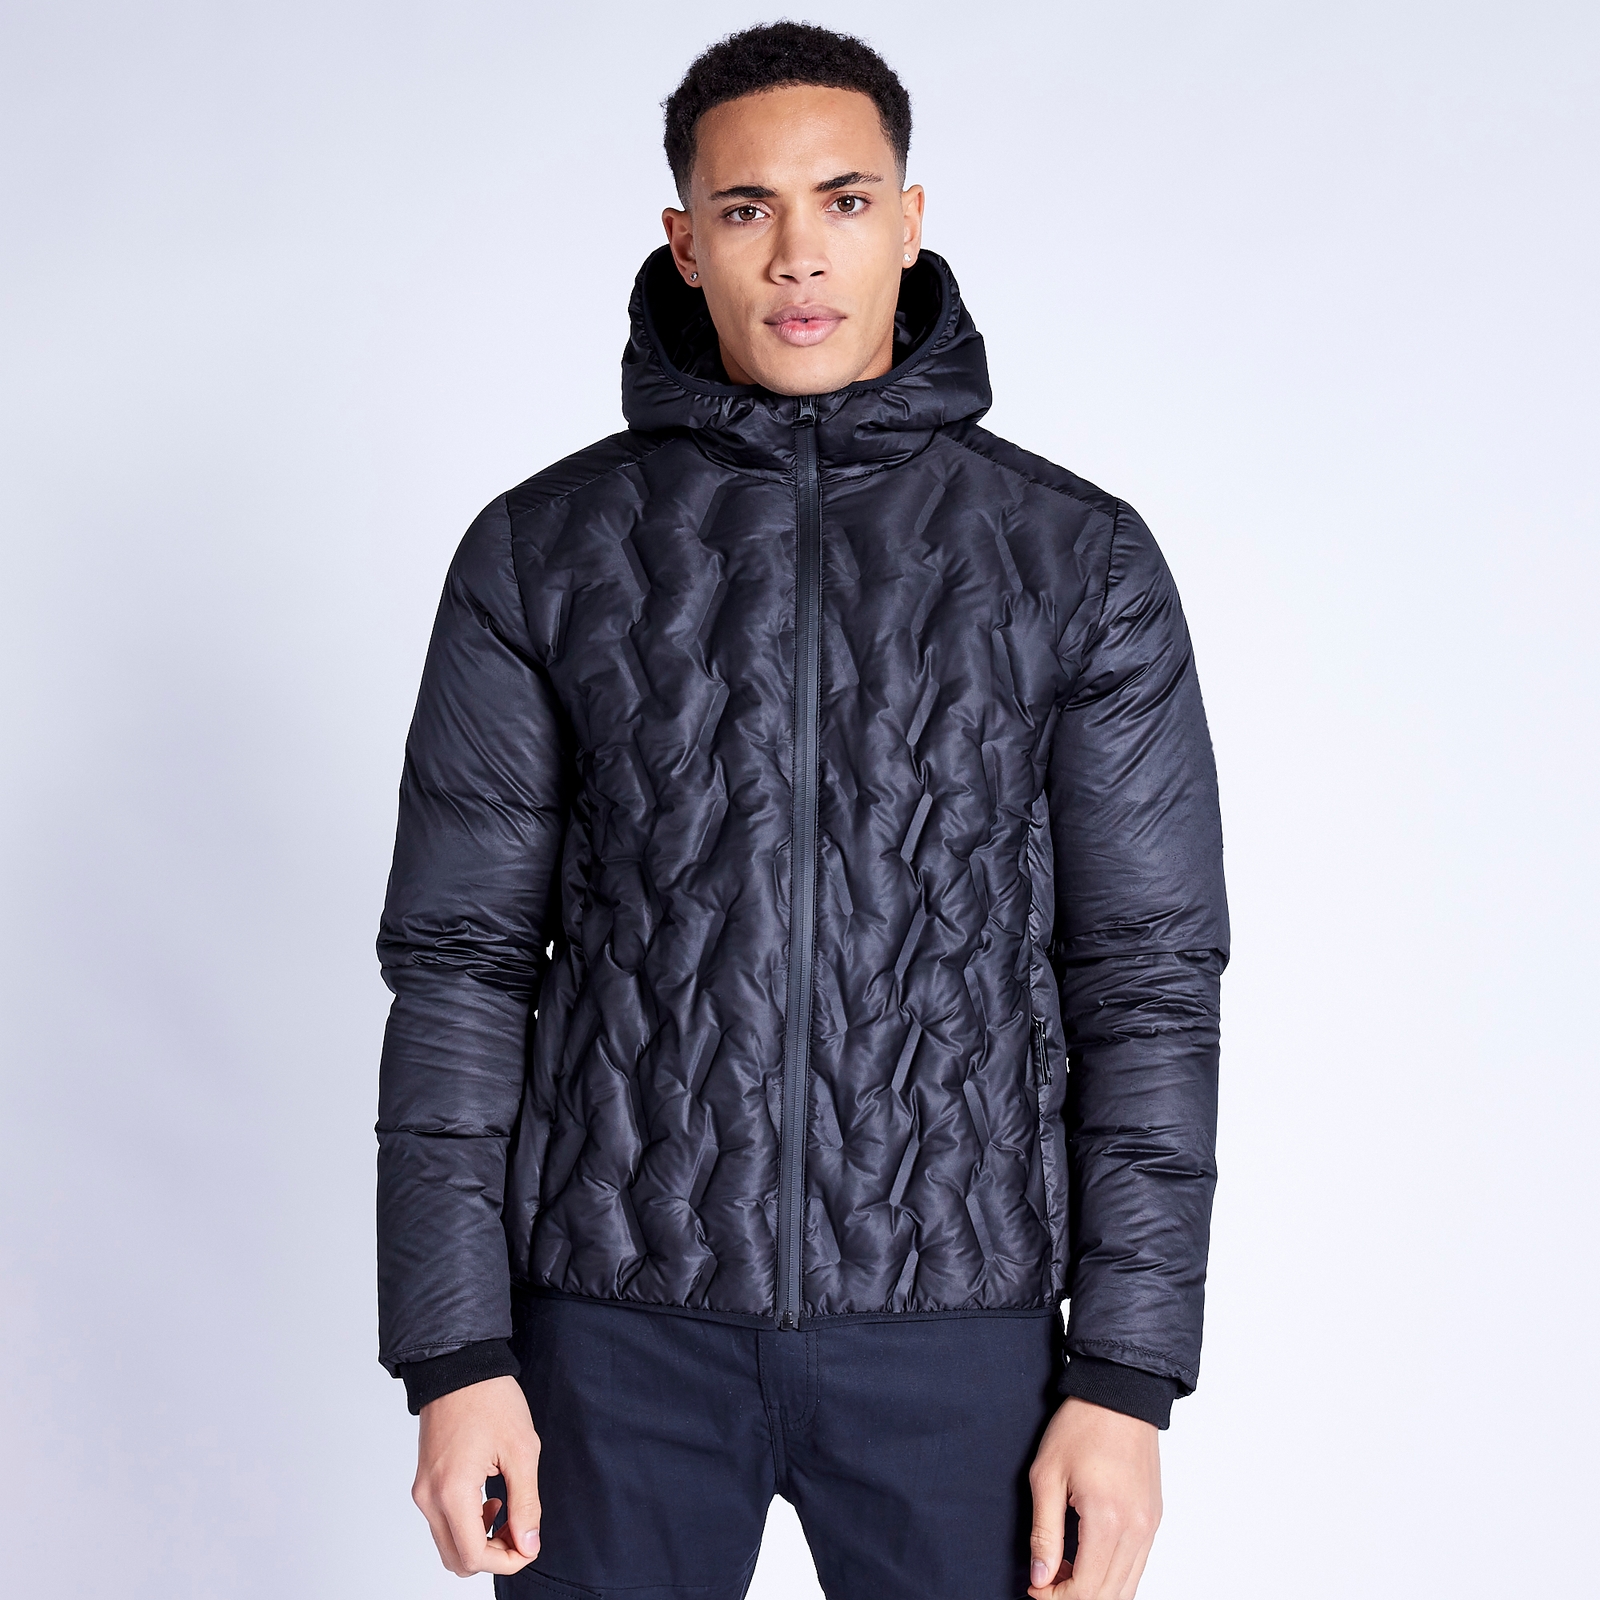 Nitro Puffer Jacket - L from 11 Degrees